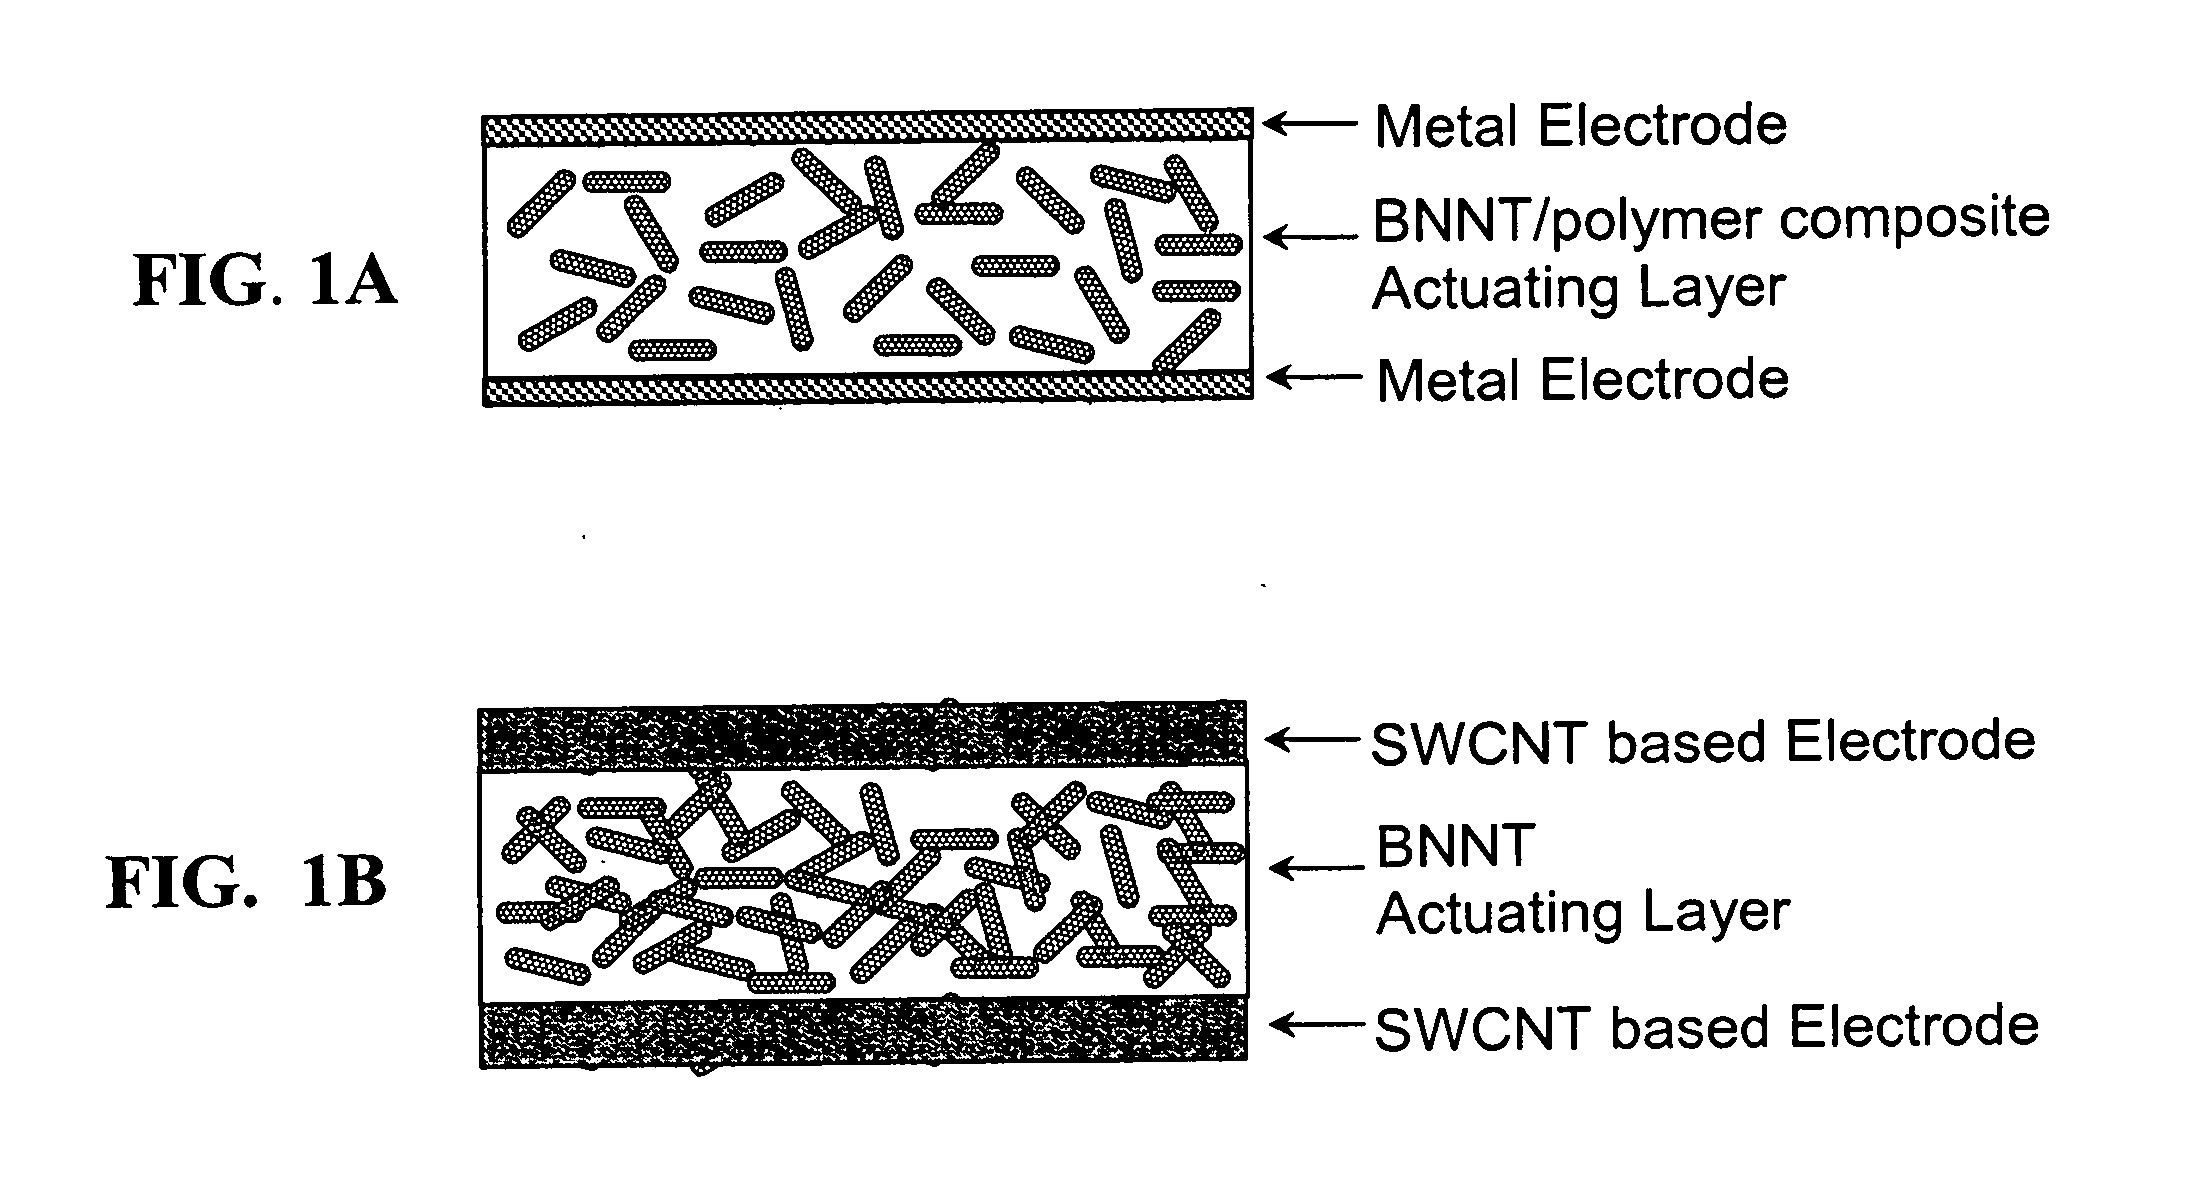 Energy conversion materials fabricated with boron nitride nanotubes (BNNTs) and BNNT polymer composites